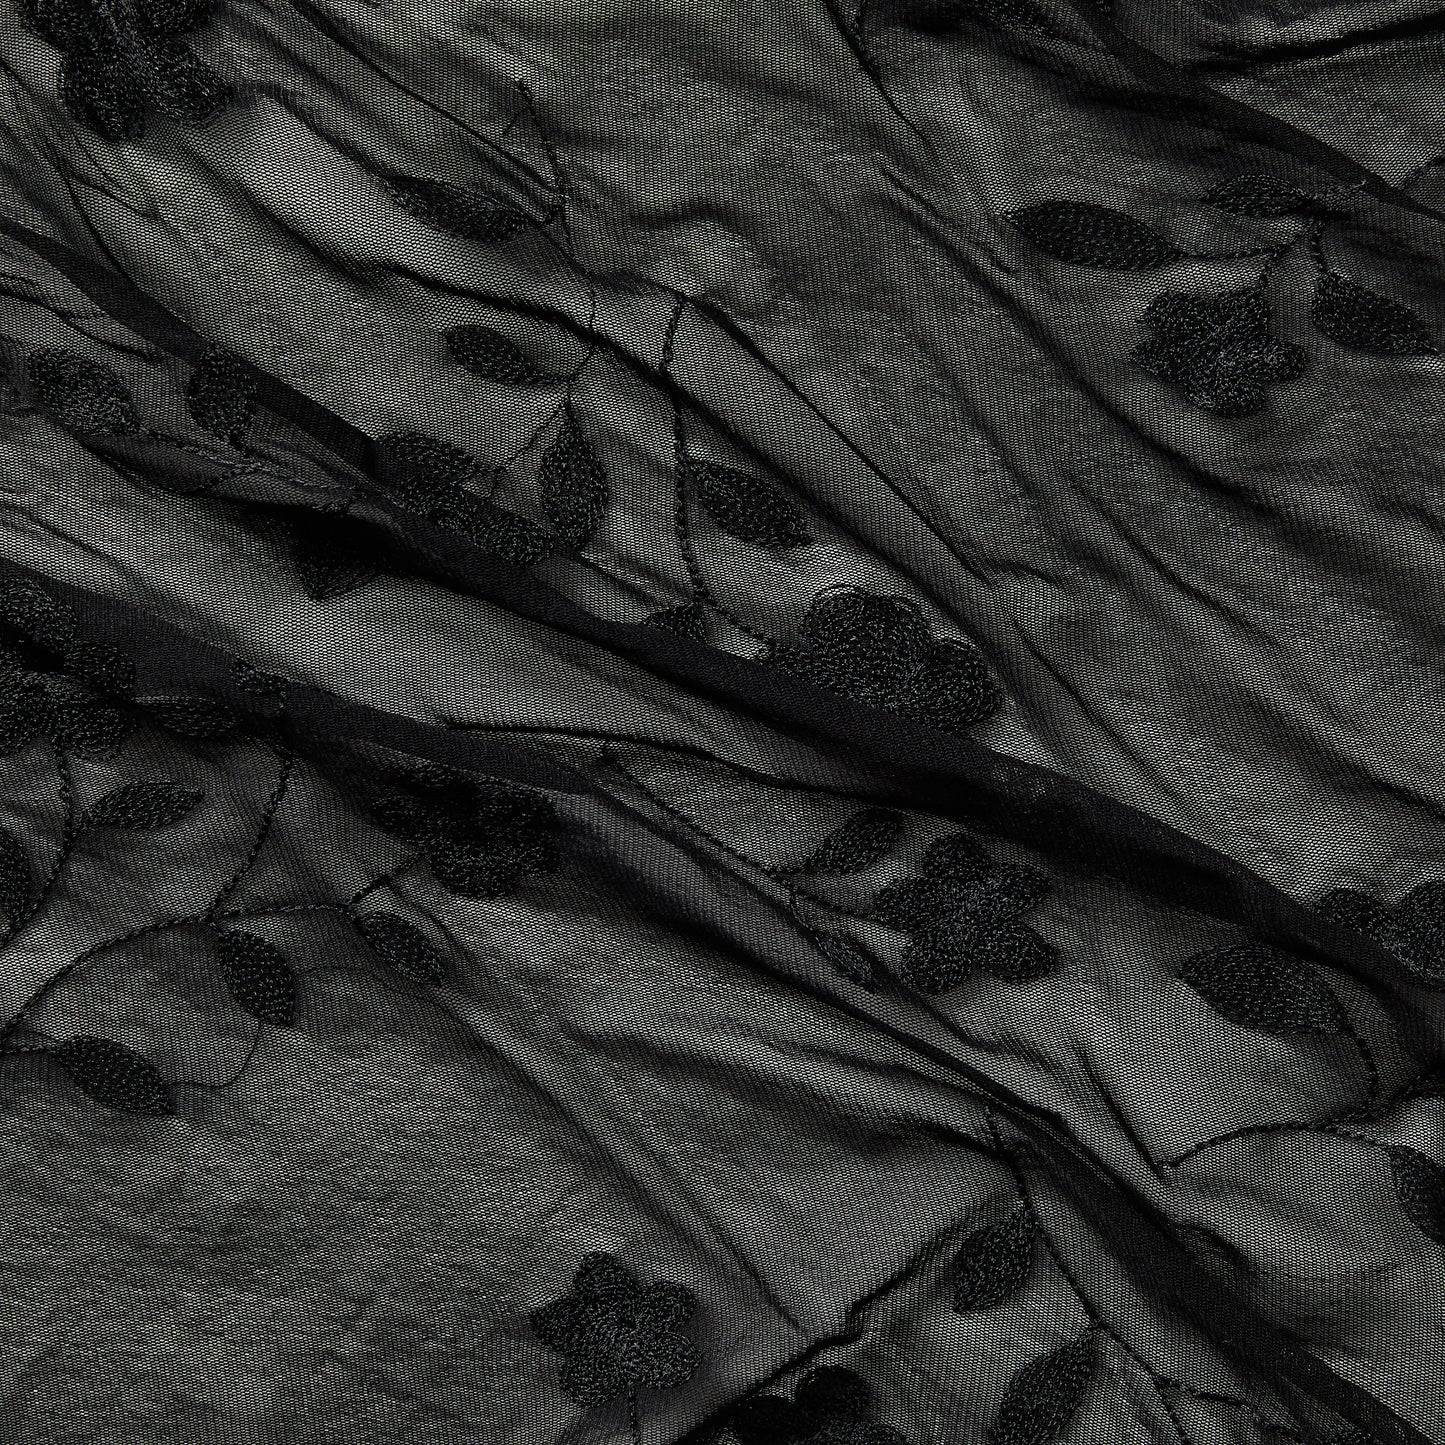 Showing destiny a black colored Rayon and Nylon Floral Embroidery on sheer black mesh 